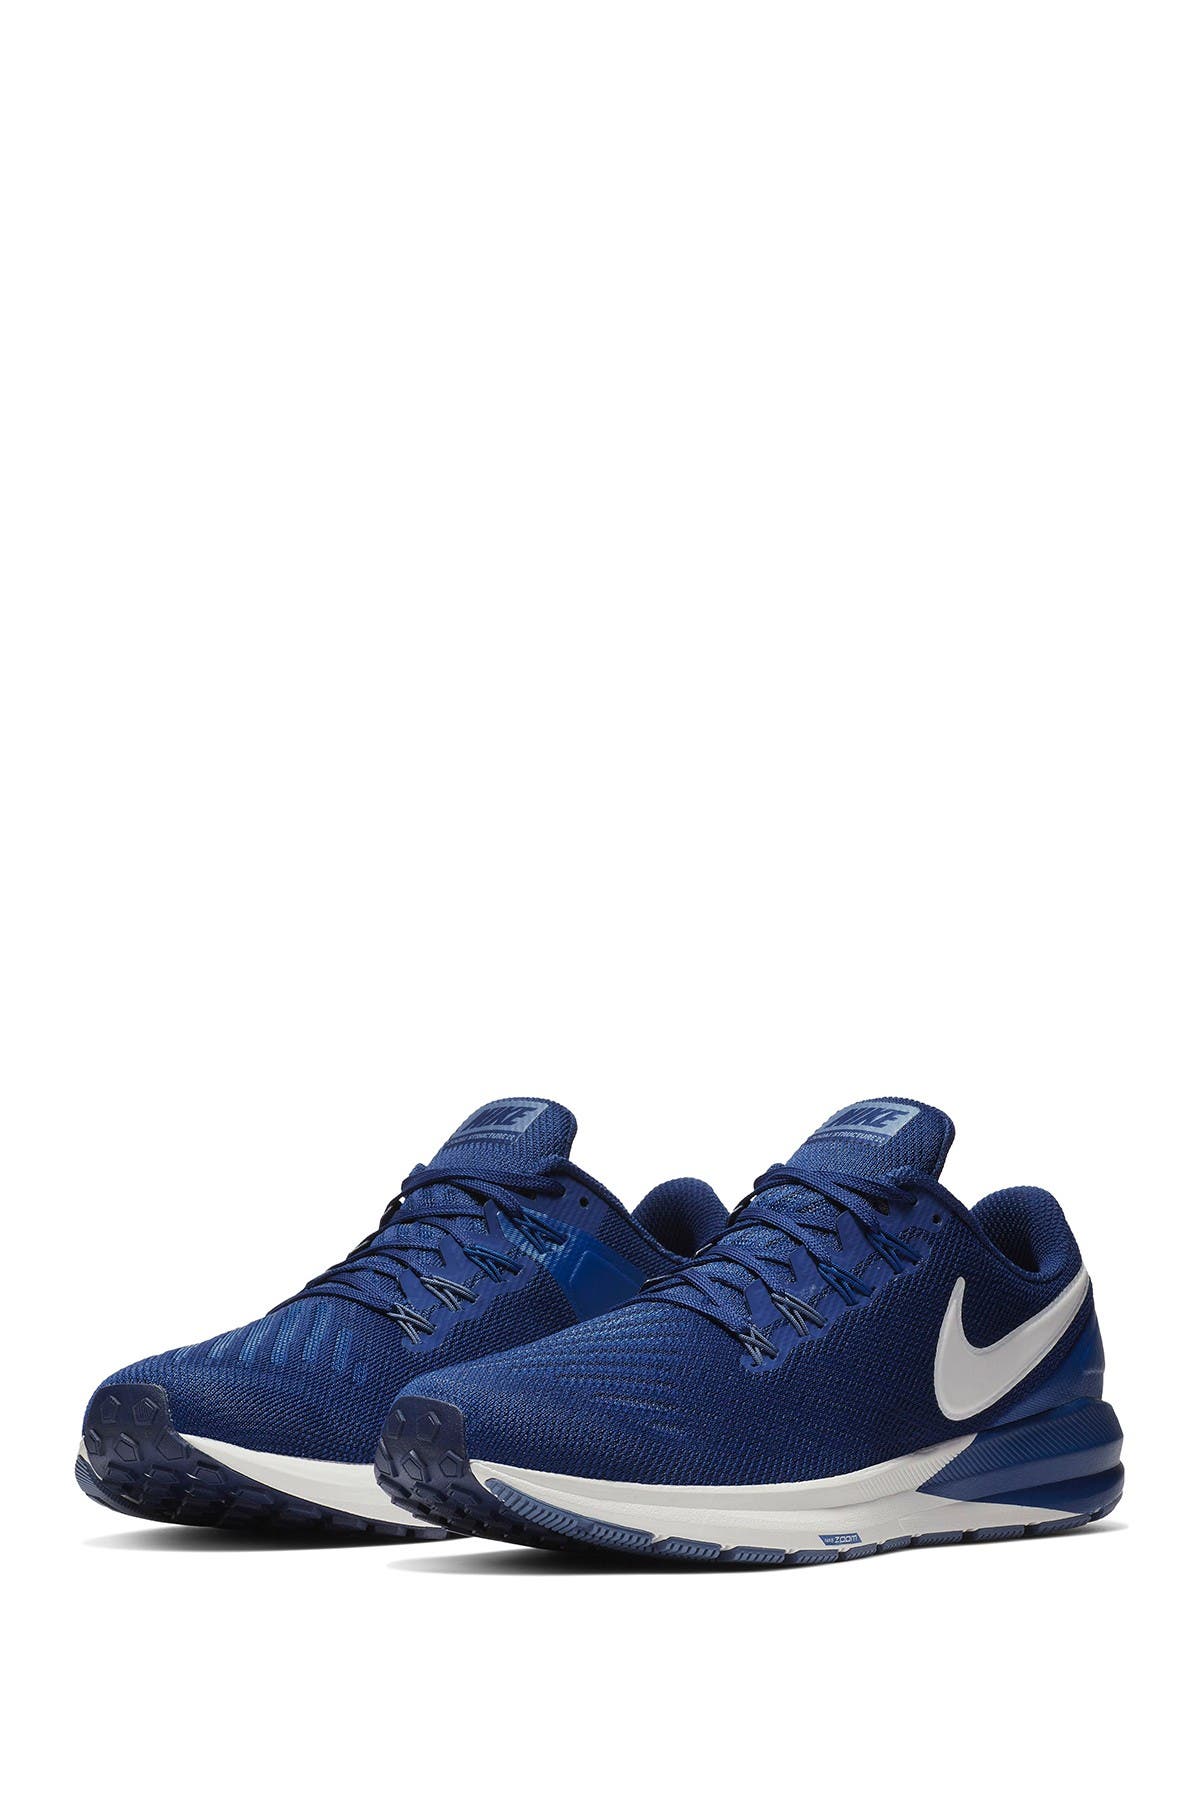 nike air zoom structure 22 narrow